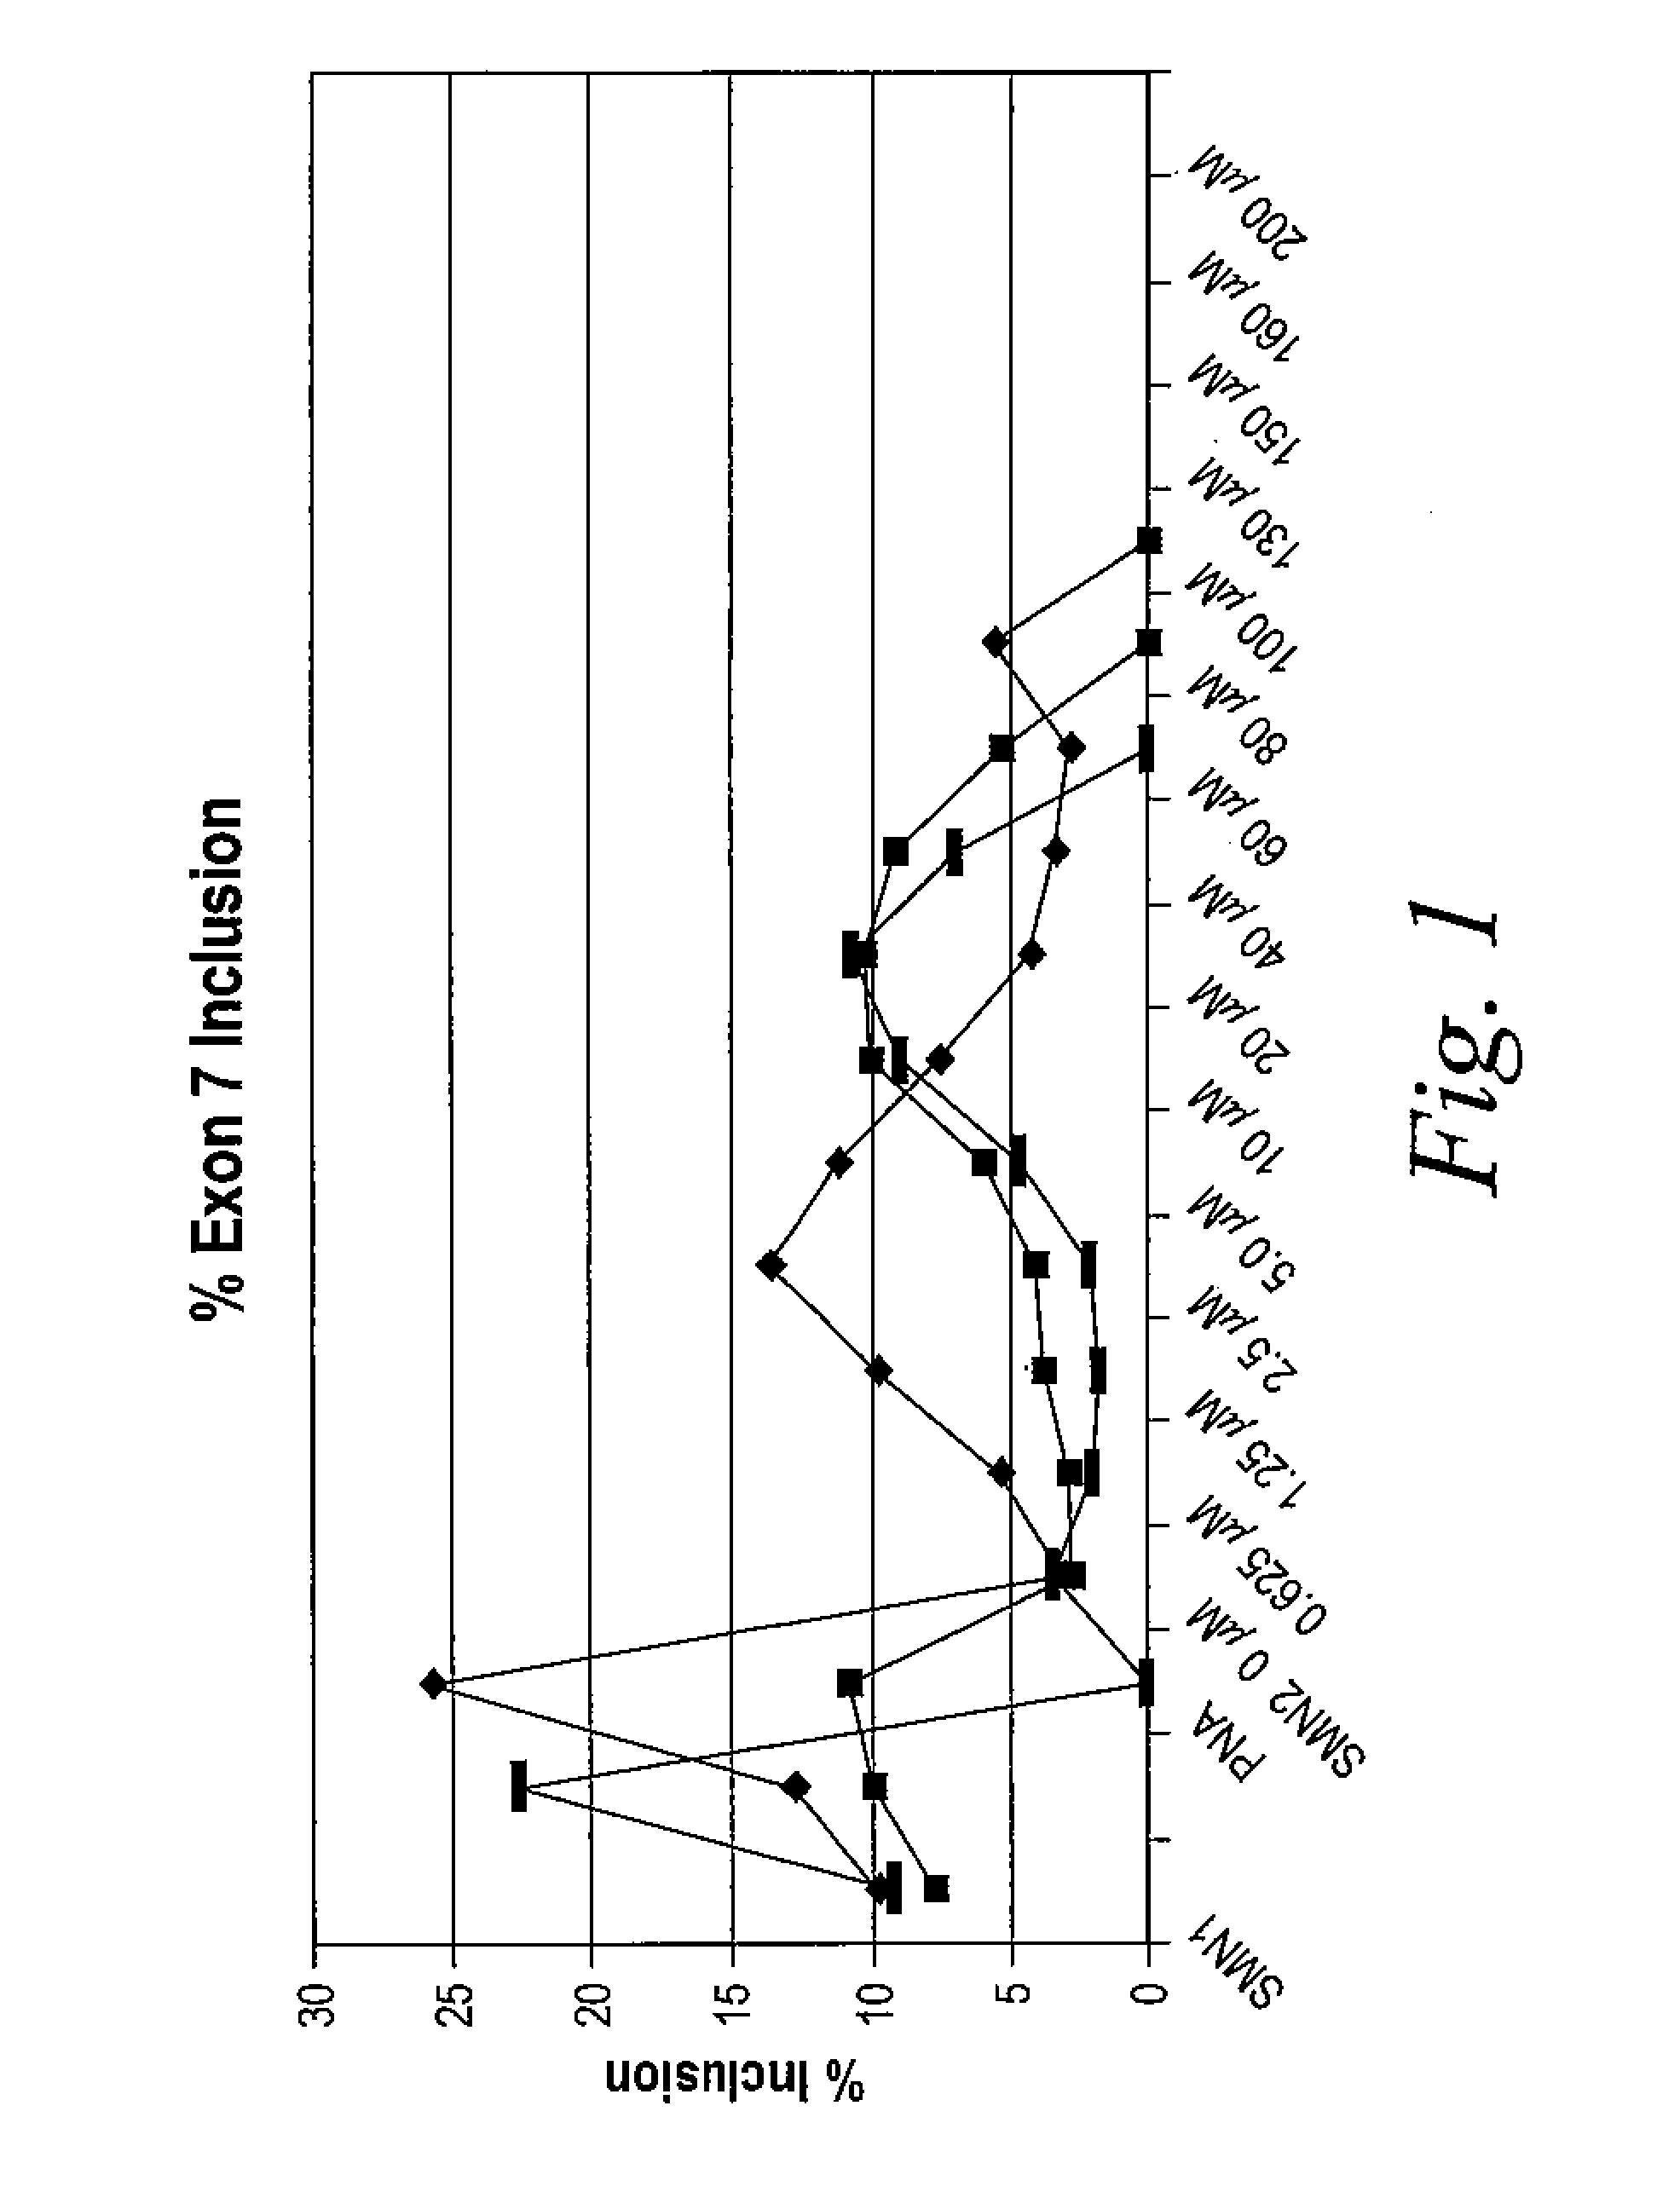 Methods for treating spinal muscular atrophy using tetracycline compounds